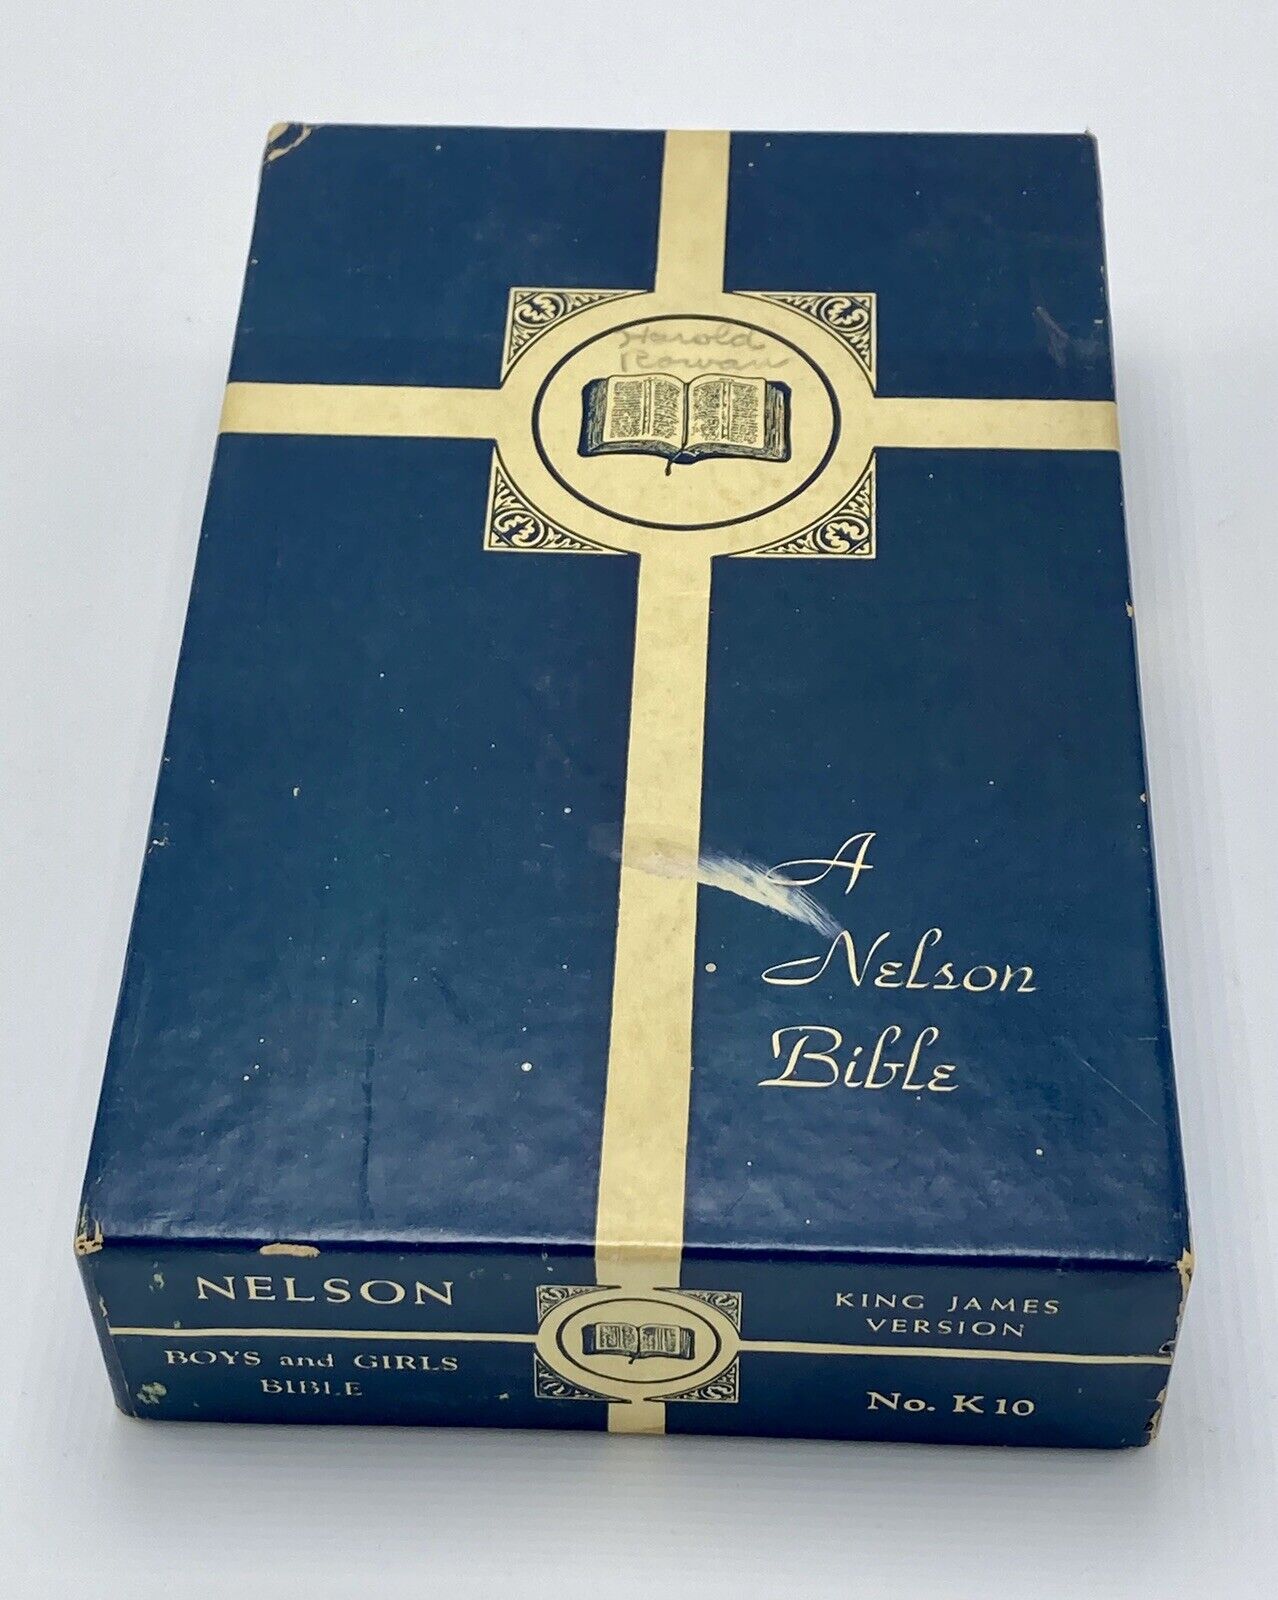 Vintage Nelson Bible, Italics Letter Edition, Books, With Original Box